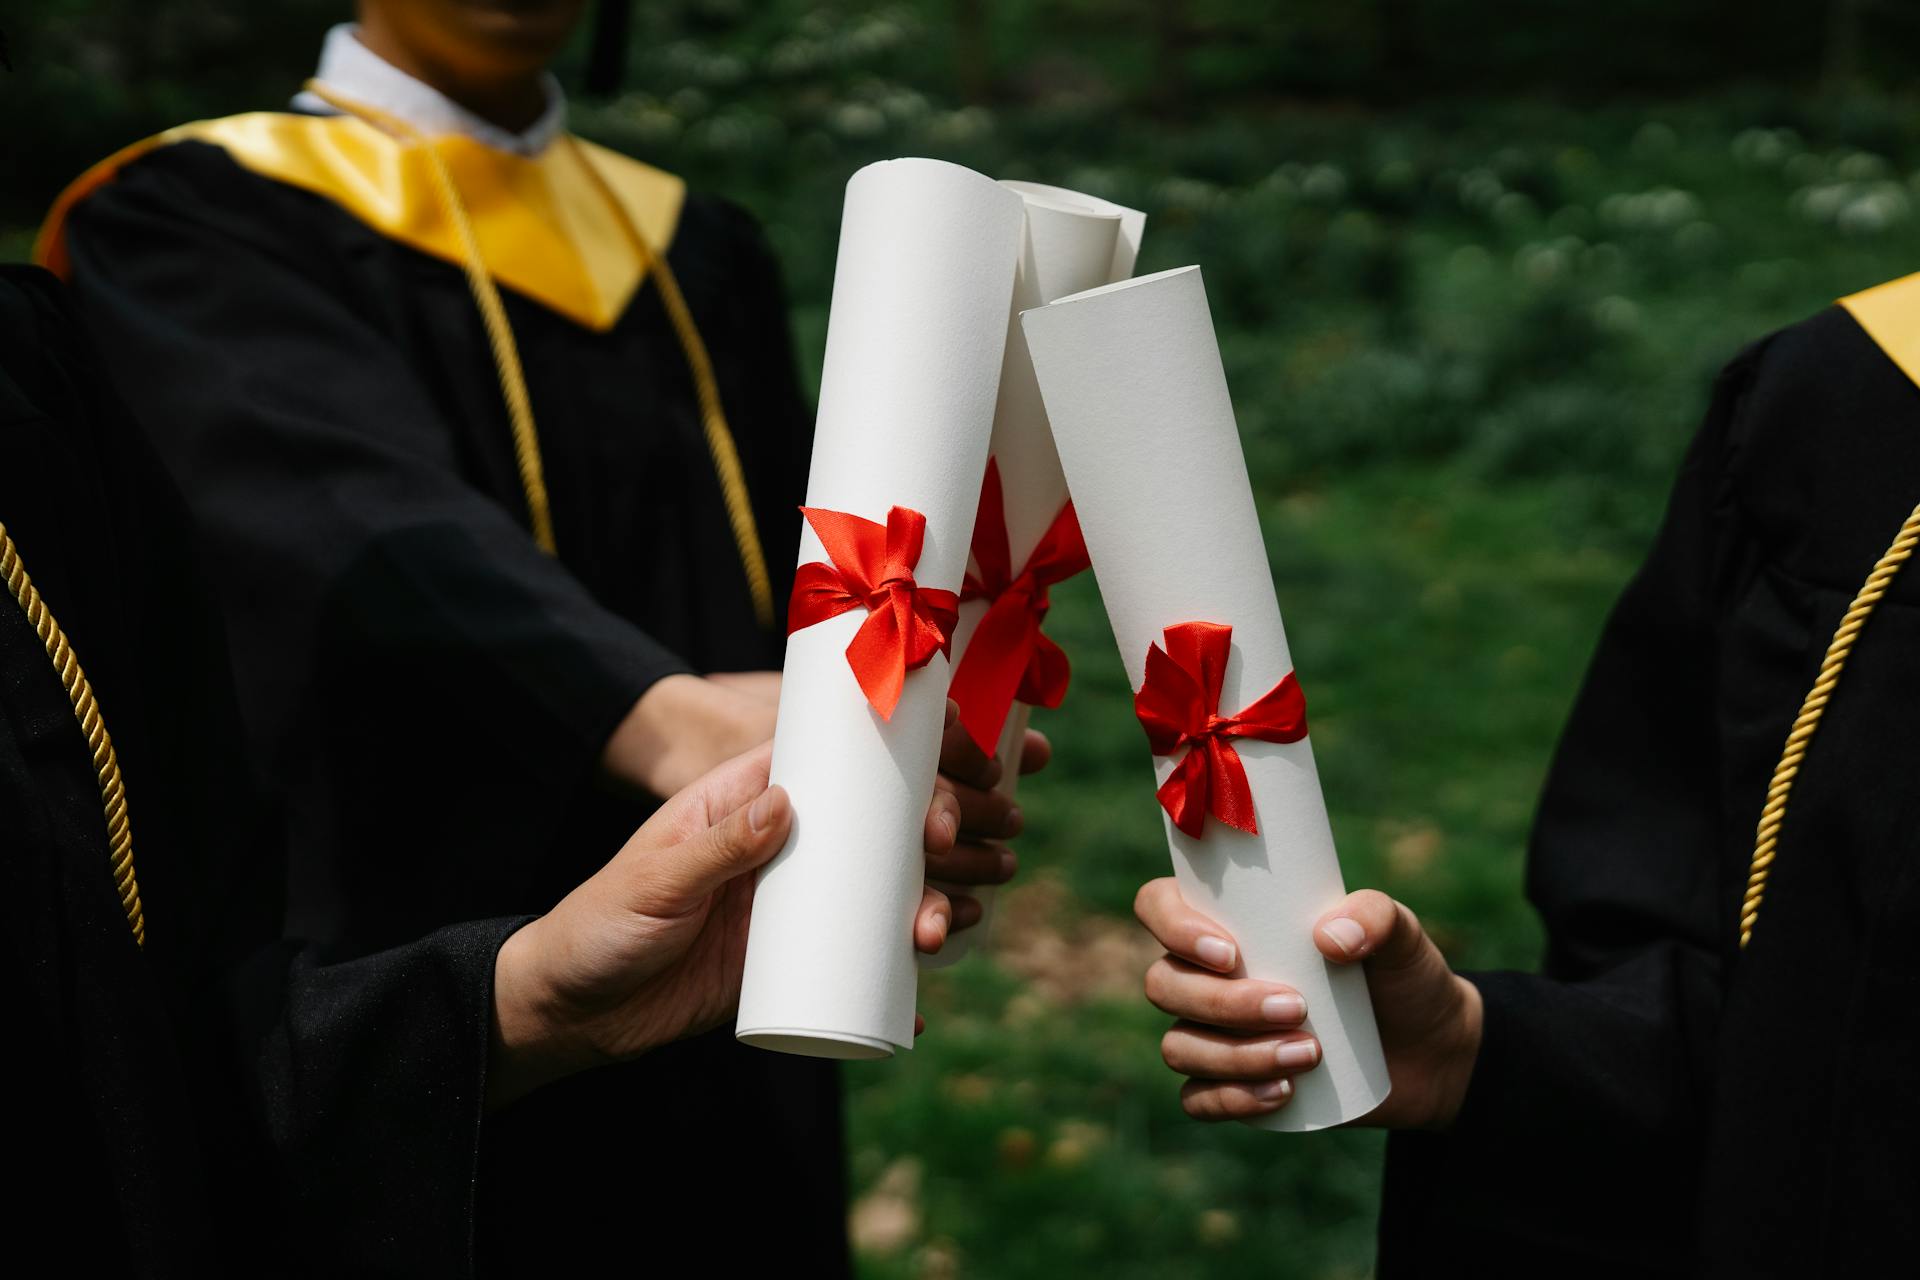 Students at their graduation | Source: Pexels